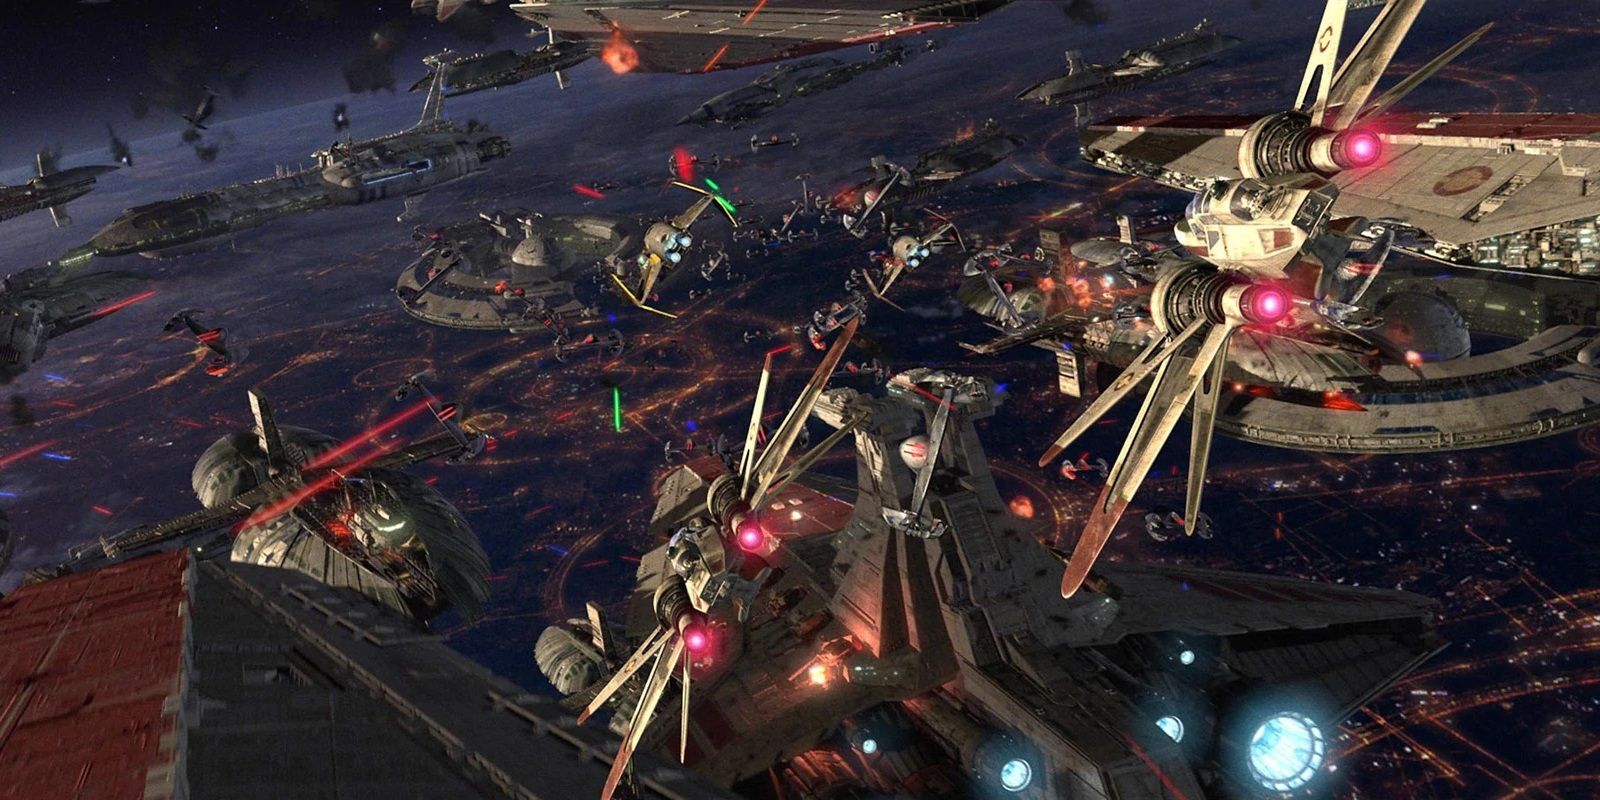 The Battle of Coruscant in Revenge of the Sith